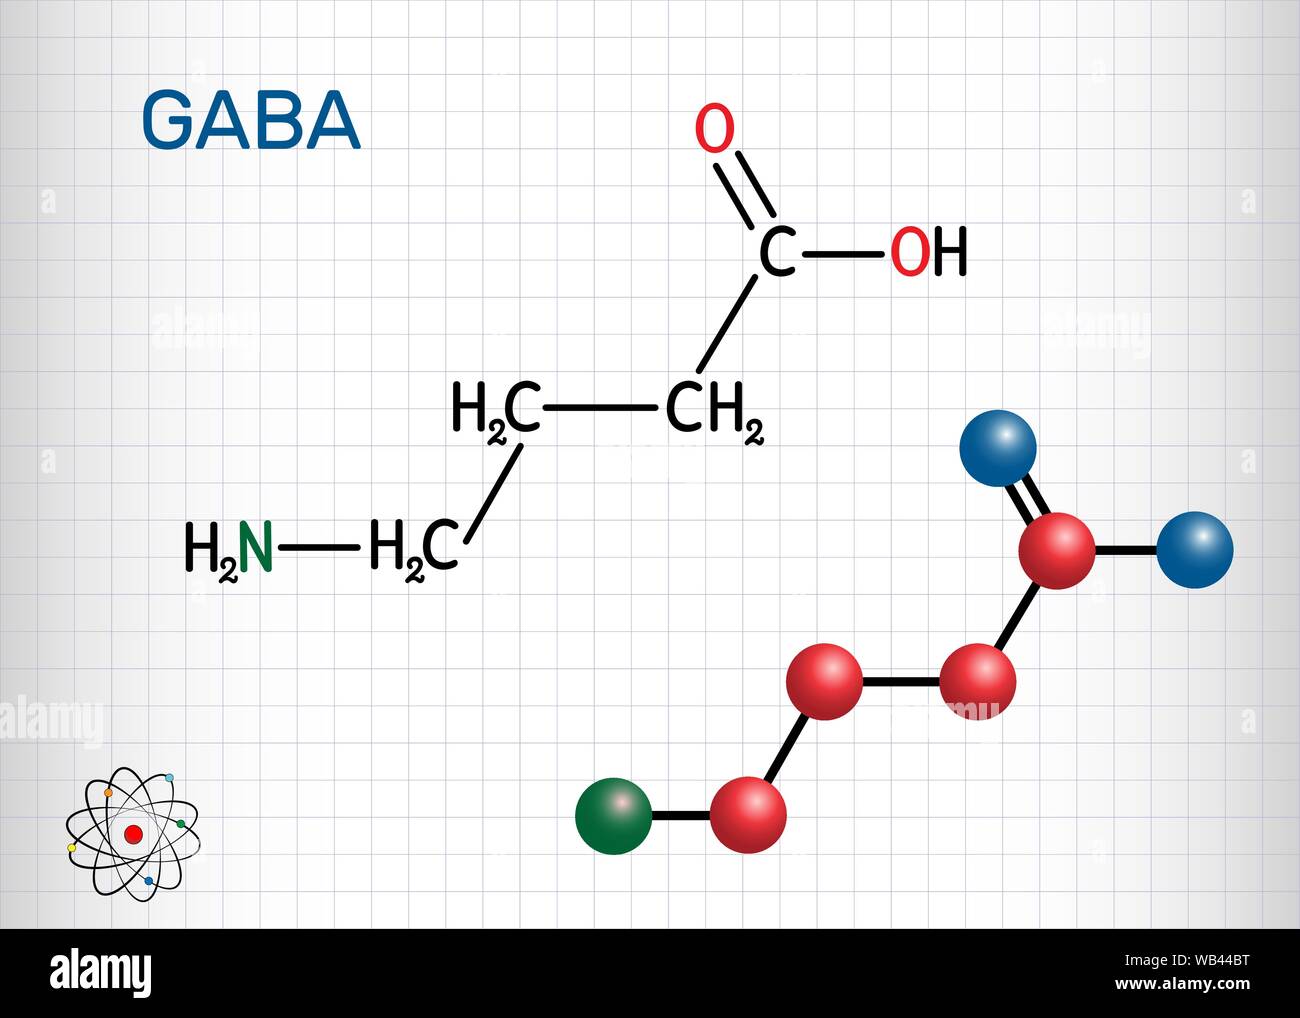 Gamma-Aminobutyric acid, GABA molecule. It is a naturally occurring neurotransmitter with central nervous system inhibitory activity. Sheet of paper i Stock Vector